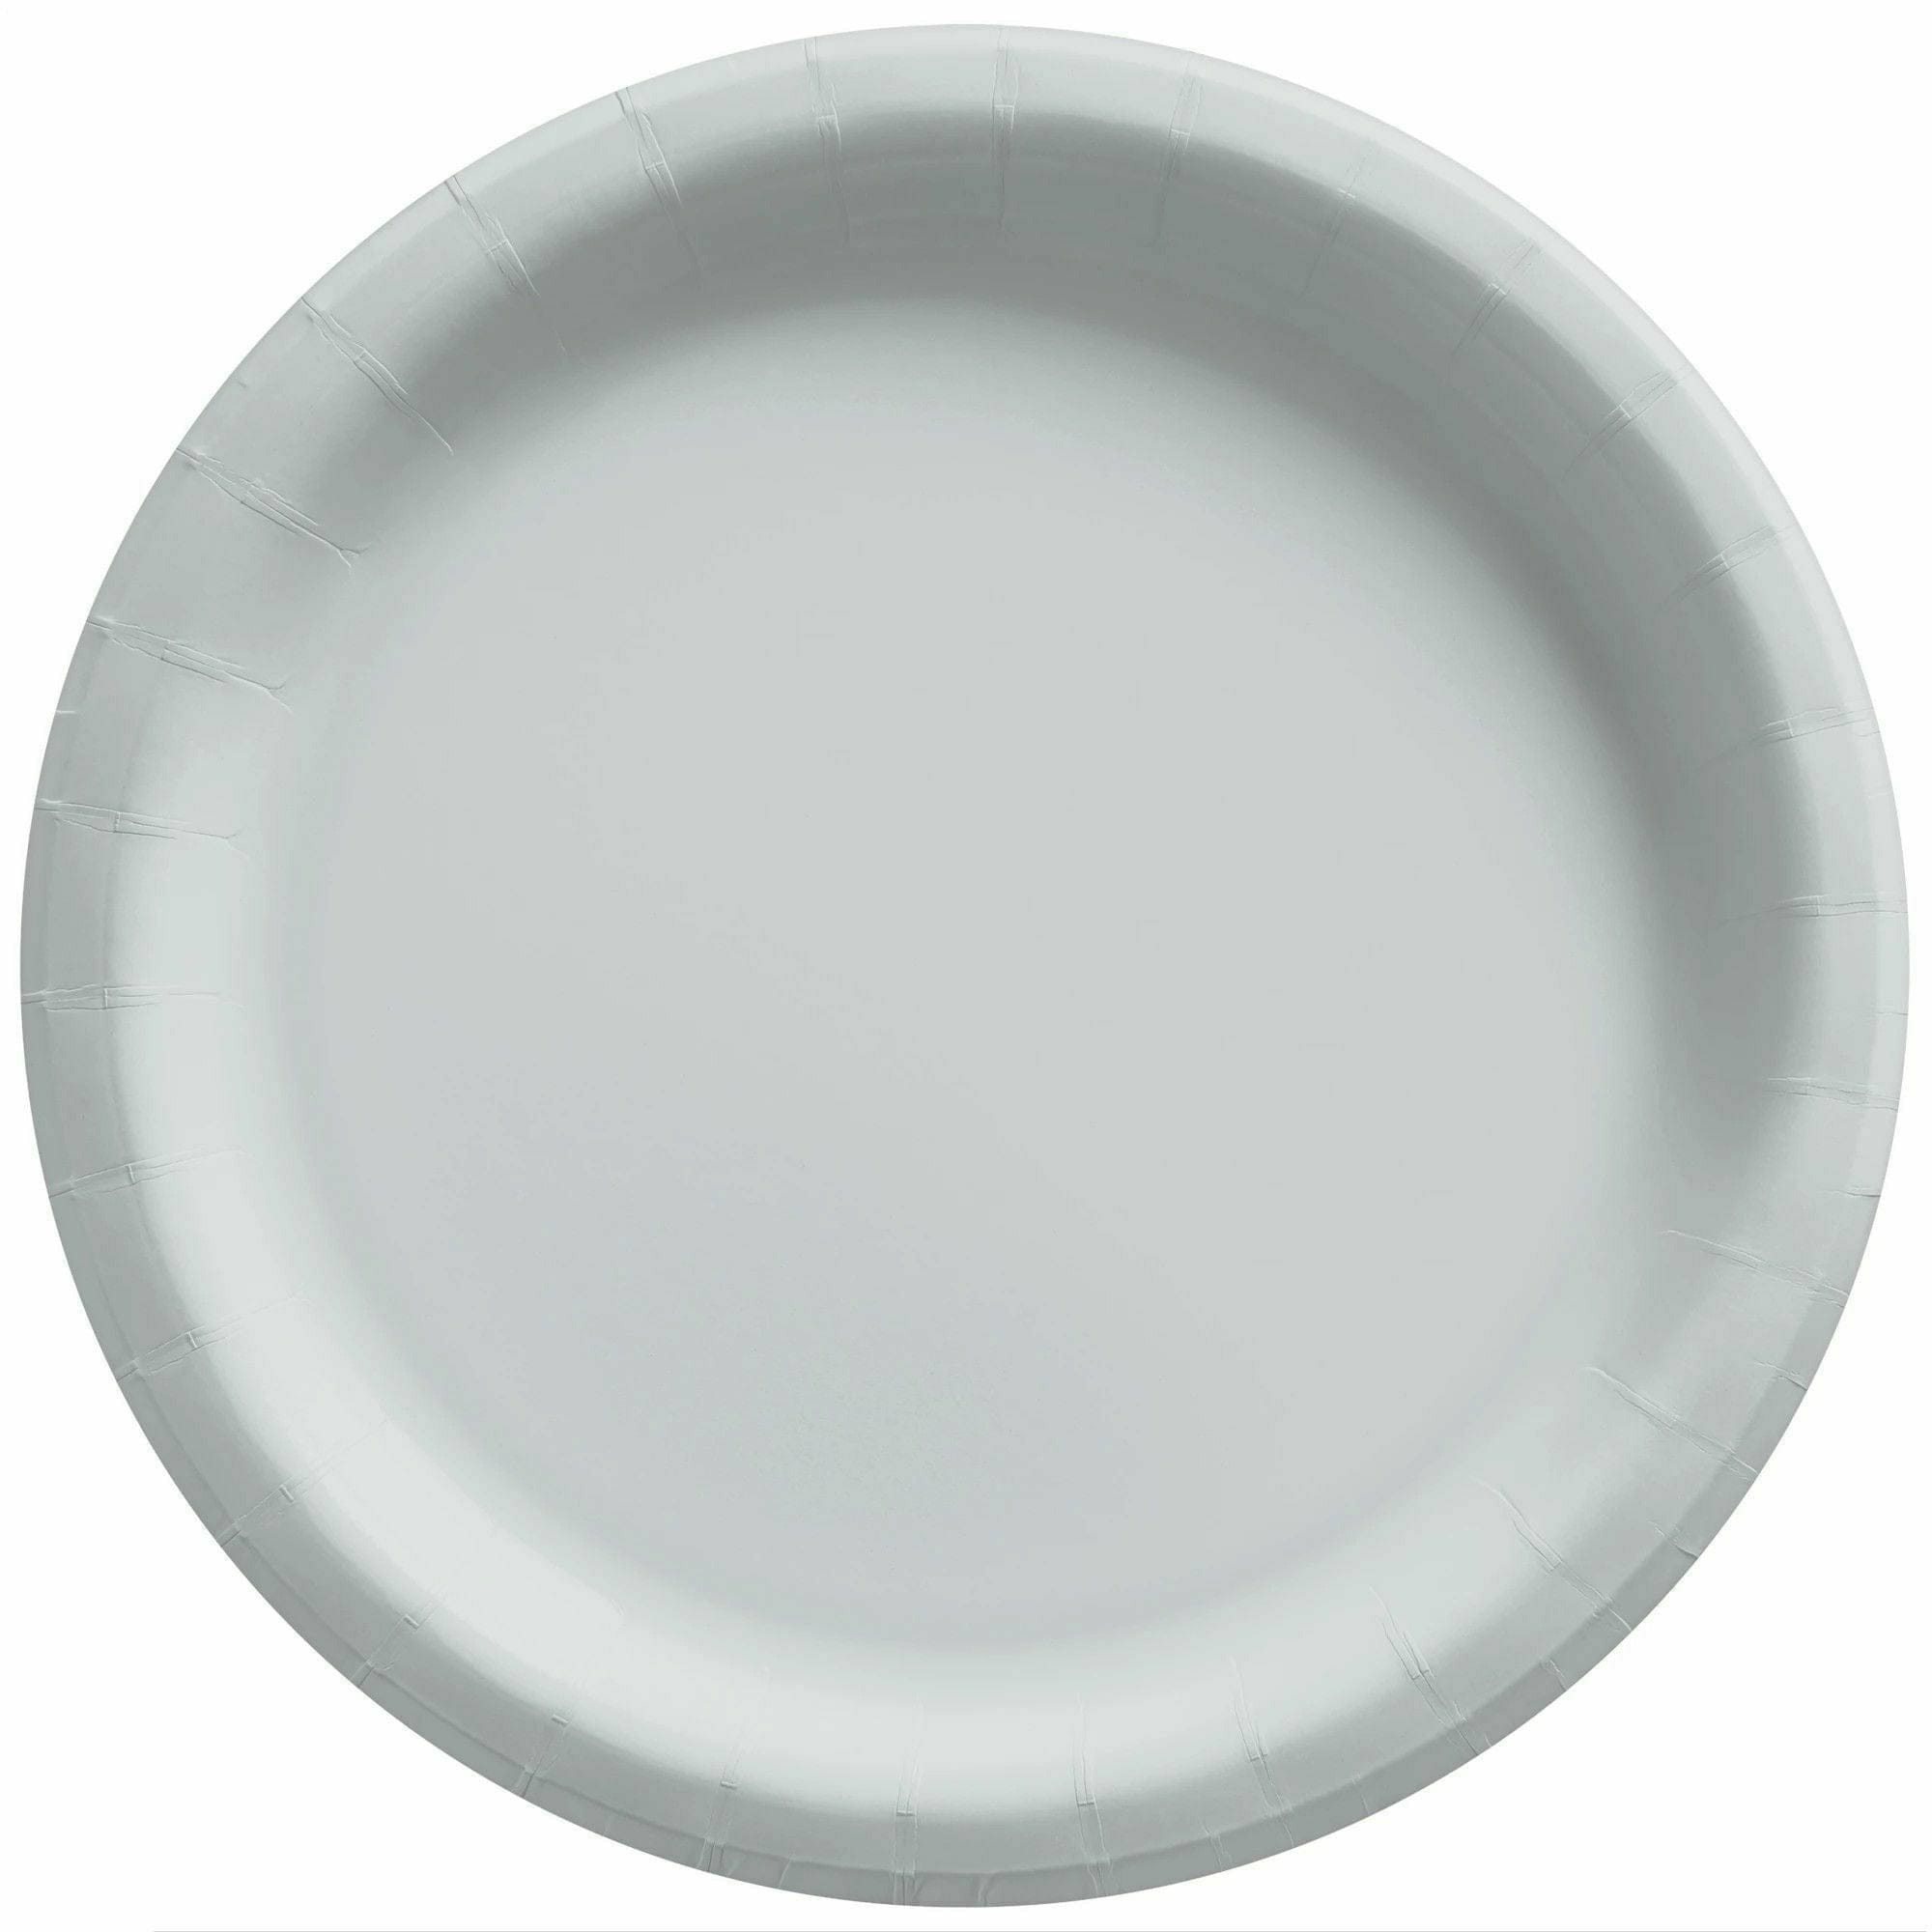 Amscan BASIC Silver - 10" Round Paper Plates, 50 Ct.